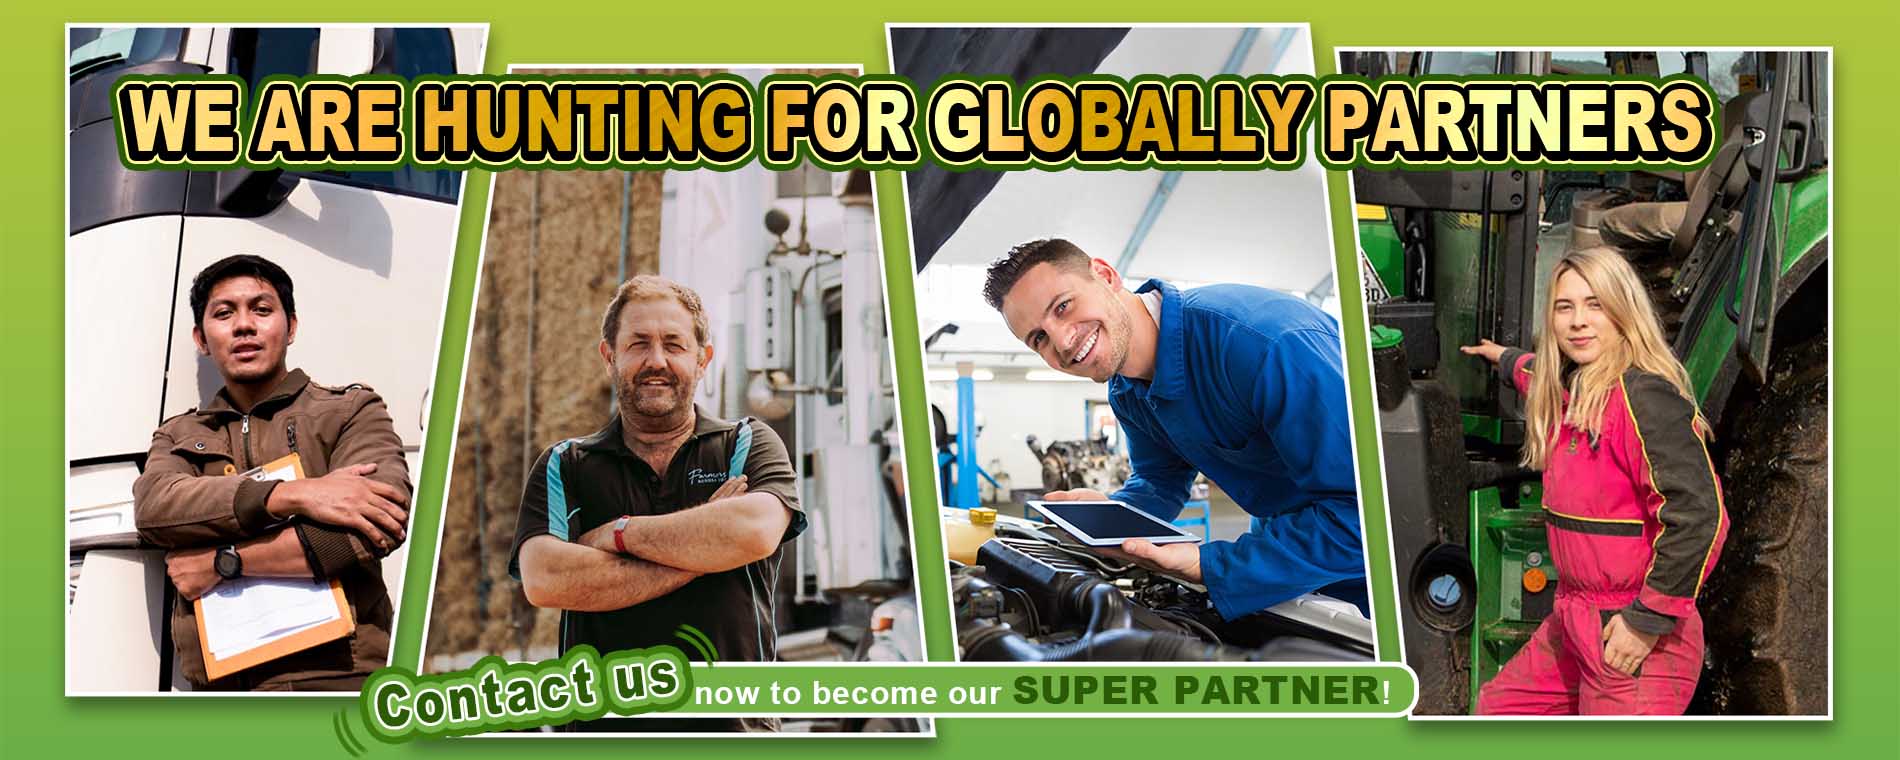 We are hunting for globally  partners. Contact us now to become our Super Partner!